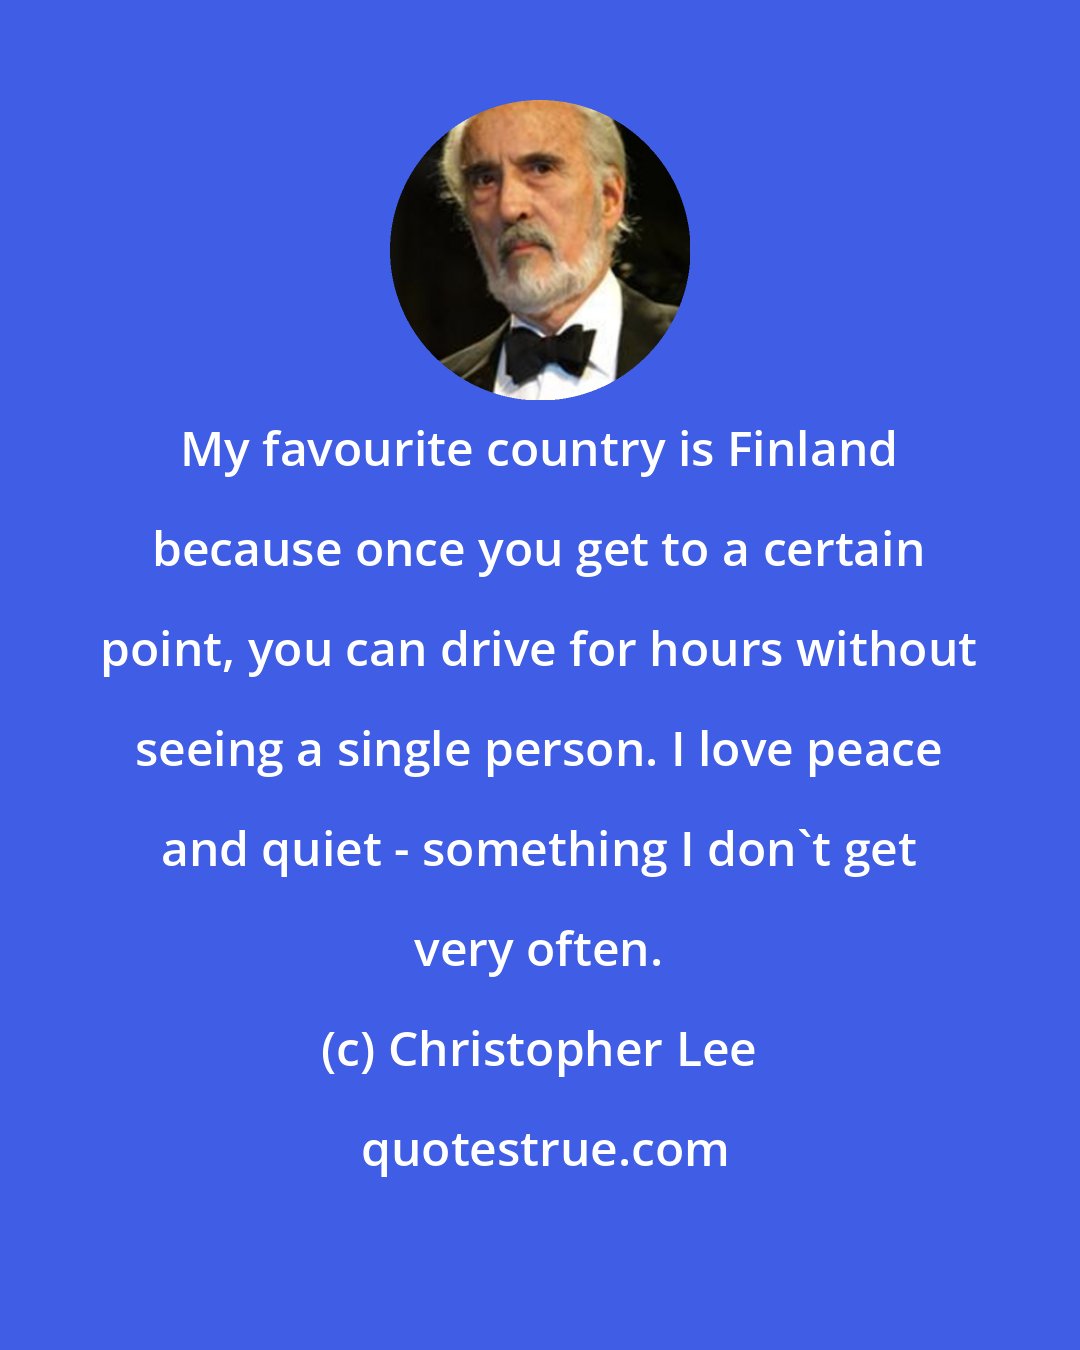 Christopher Lee: My favourite country is Finland because once you get to a certain point, you can drive for hours without seeing a single person. I love peace and quiet - something I don't get very often.